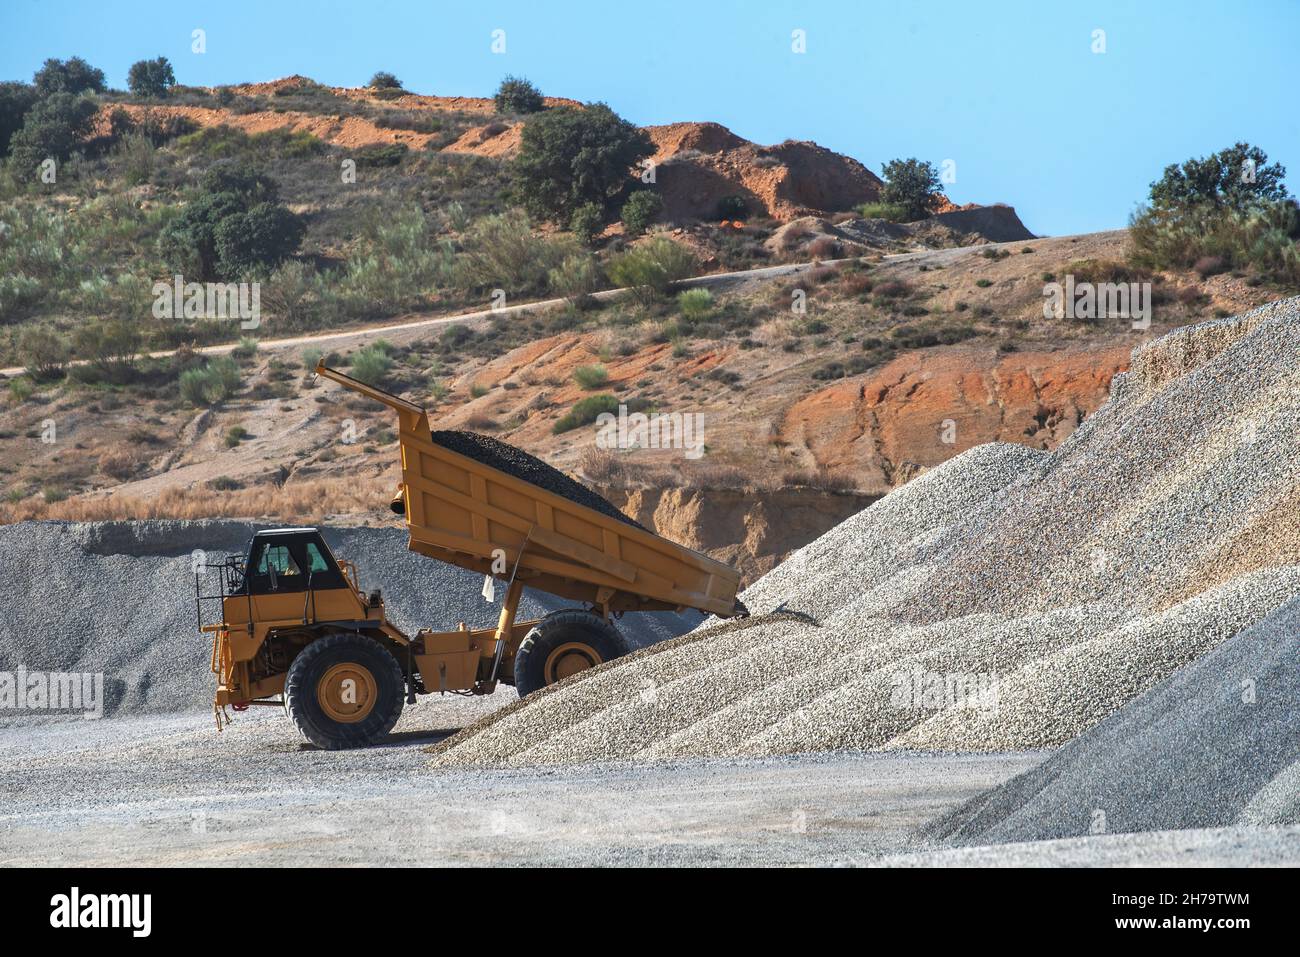 Large dump truck with the tipper raised unloading sand in a quarry. Stock Photo